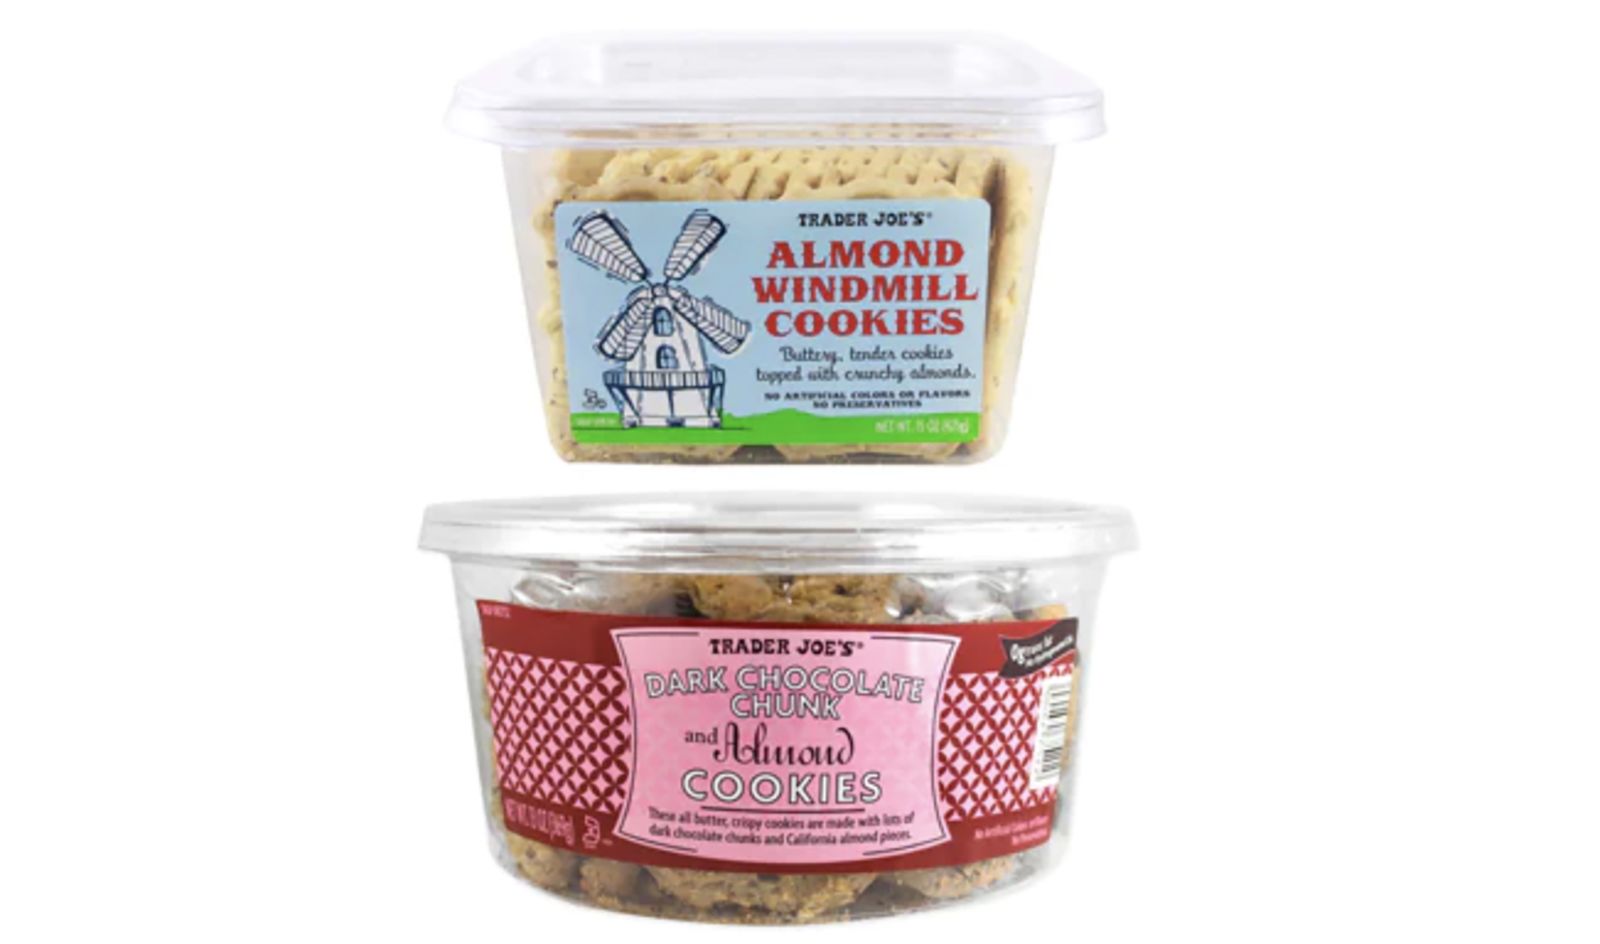 Trader Joe's Almond Windmill Cookies (top) and Dark Chocolate Chunk and Almond Cookies (bottom) wer...